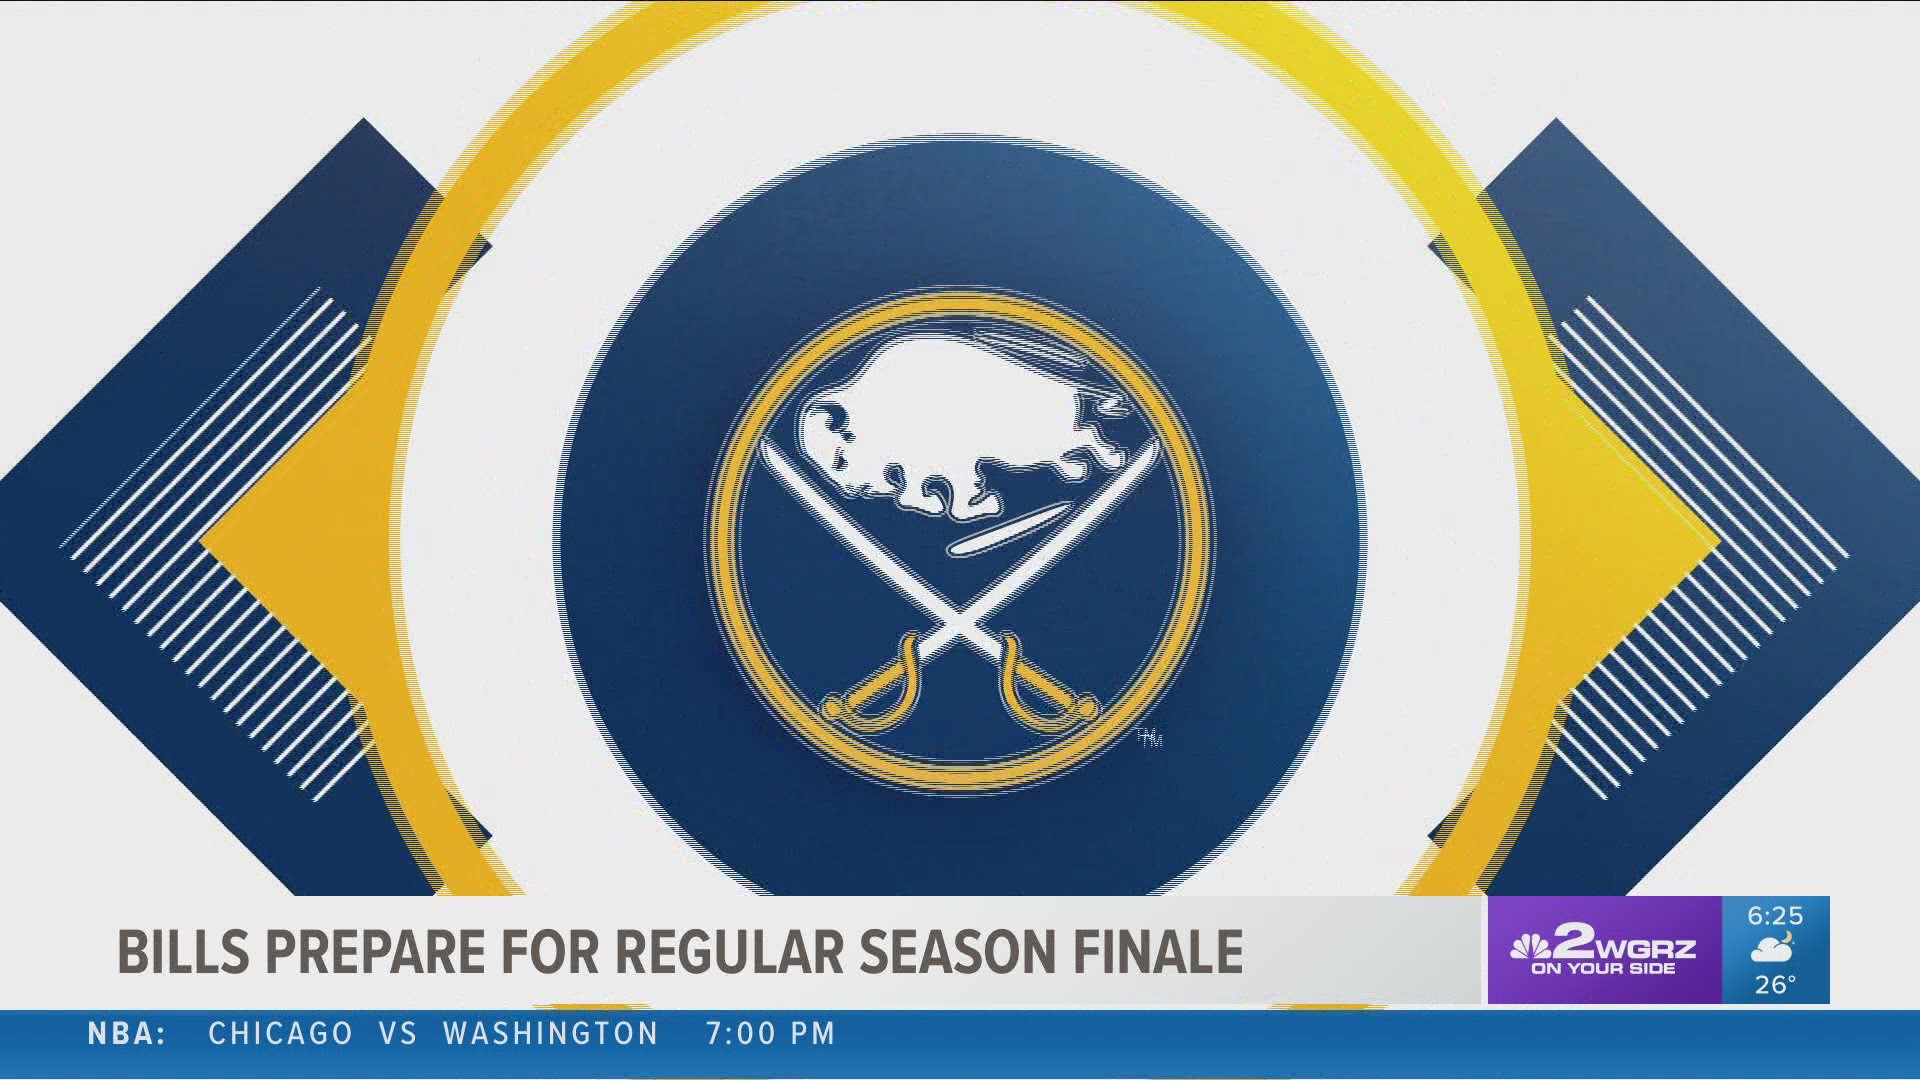 After halting the 2019-2020 season since March, the Sabres will finally be back together and starting the season on Jan 14.